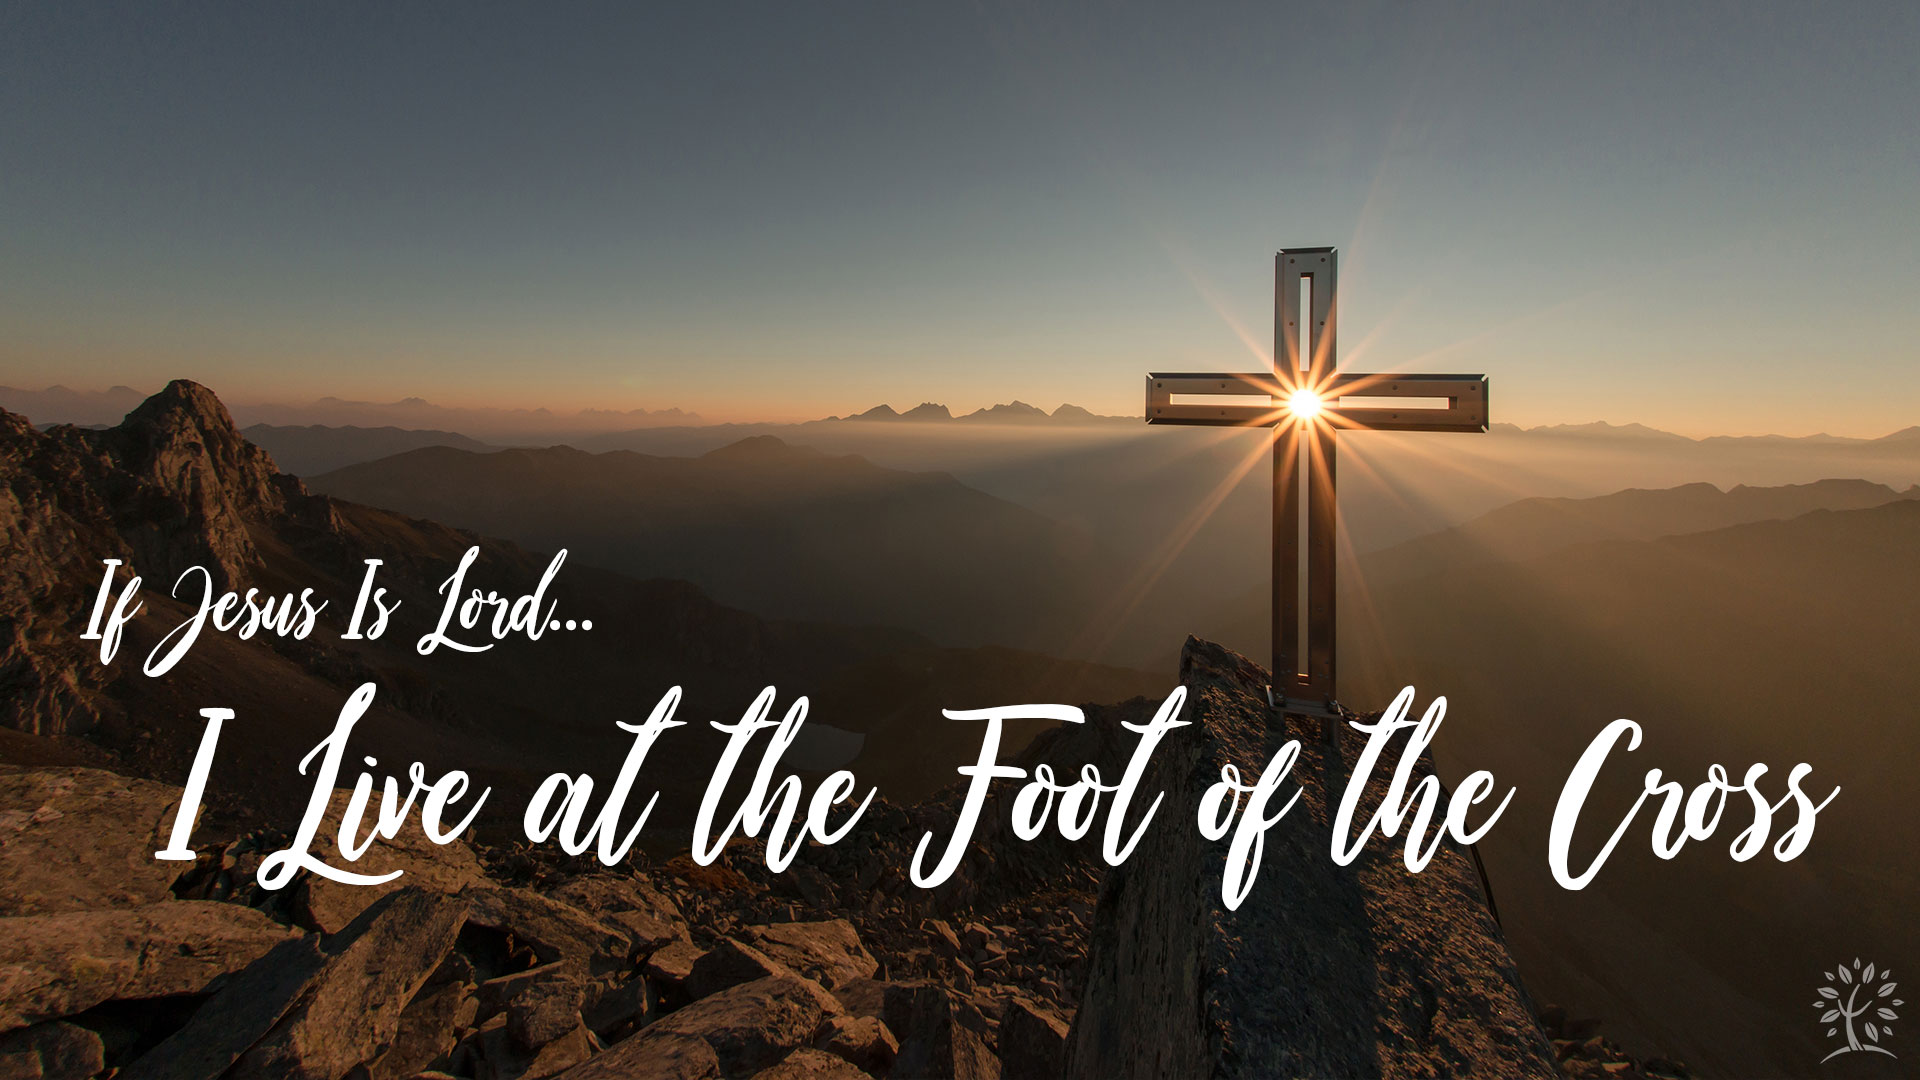 I Live at the Foot of the Cross